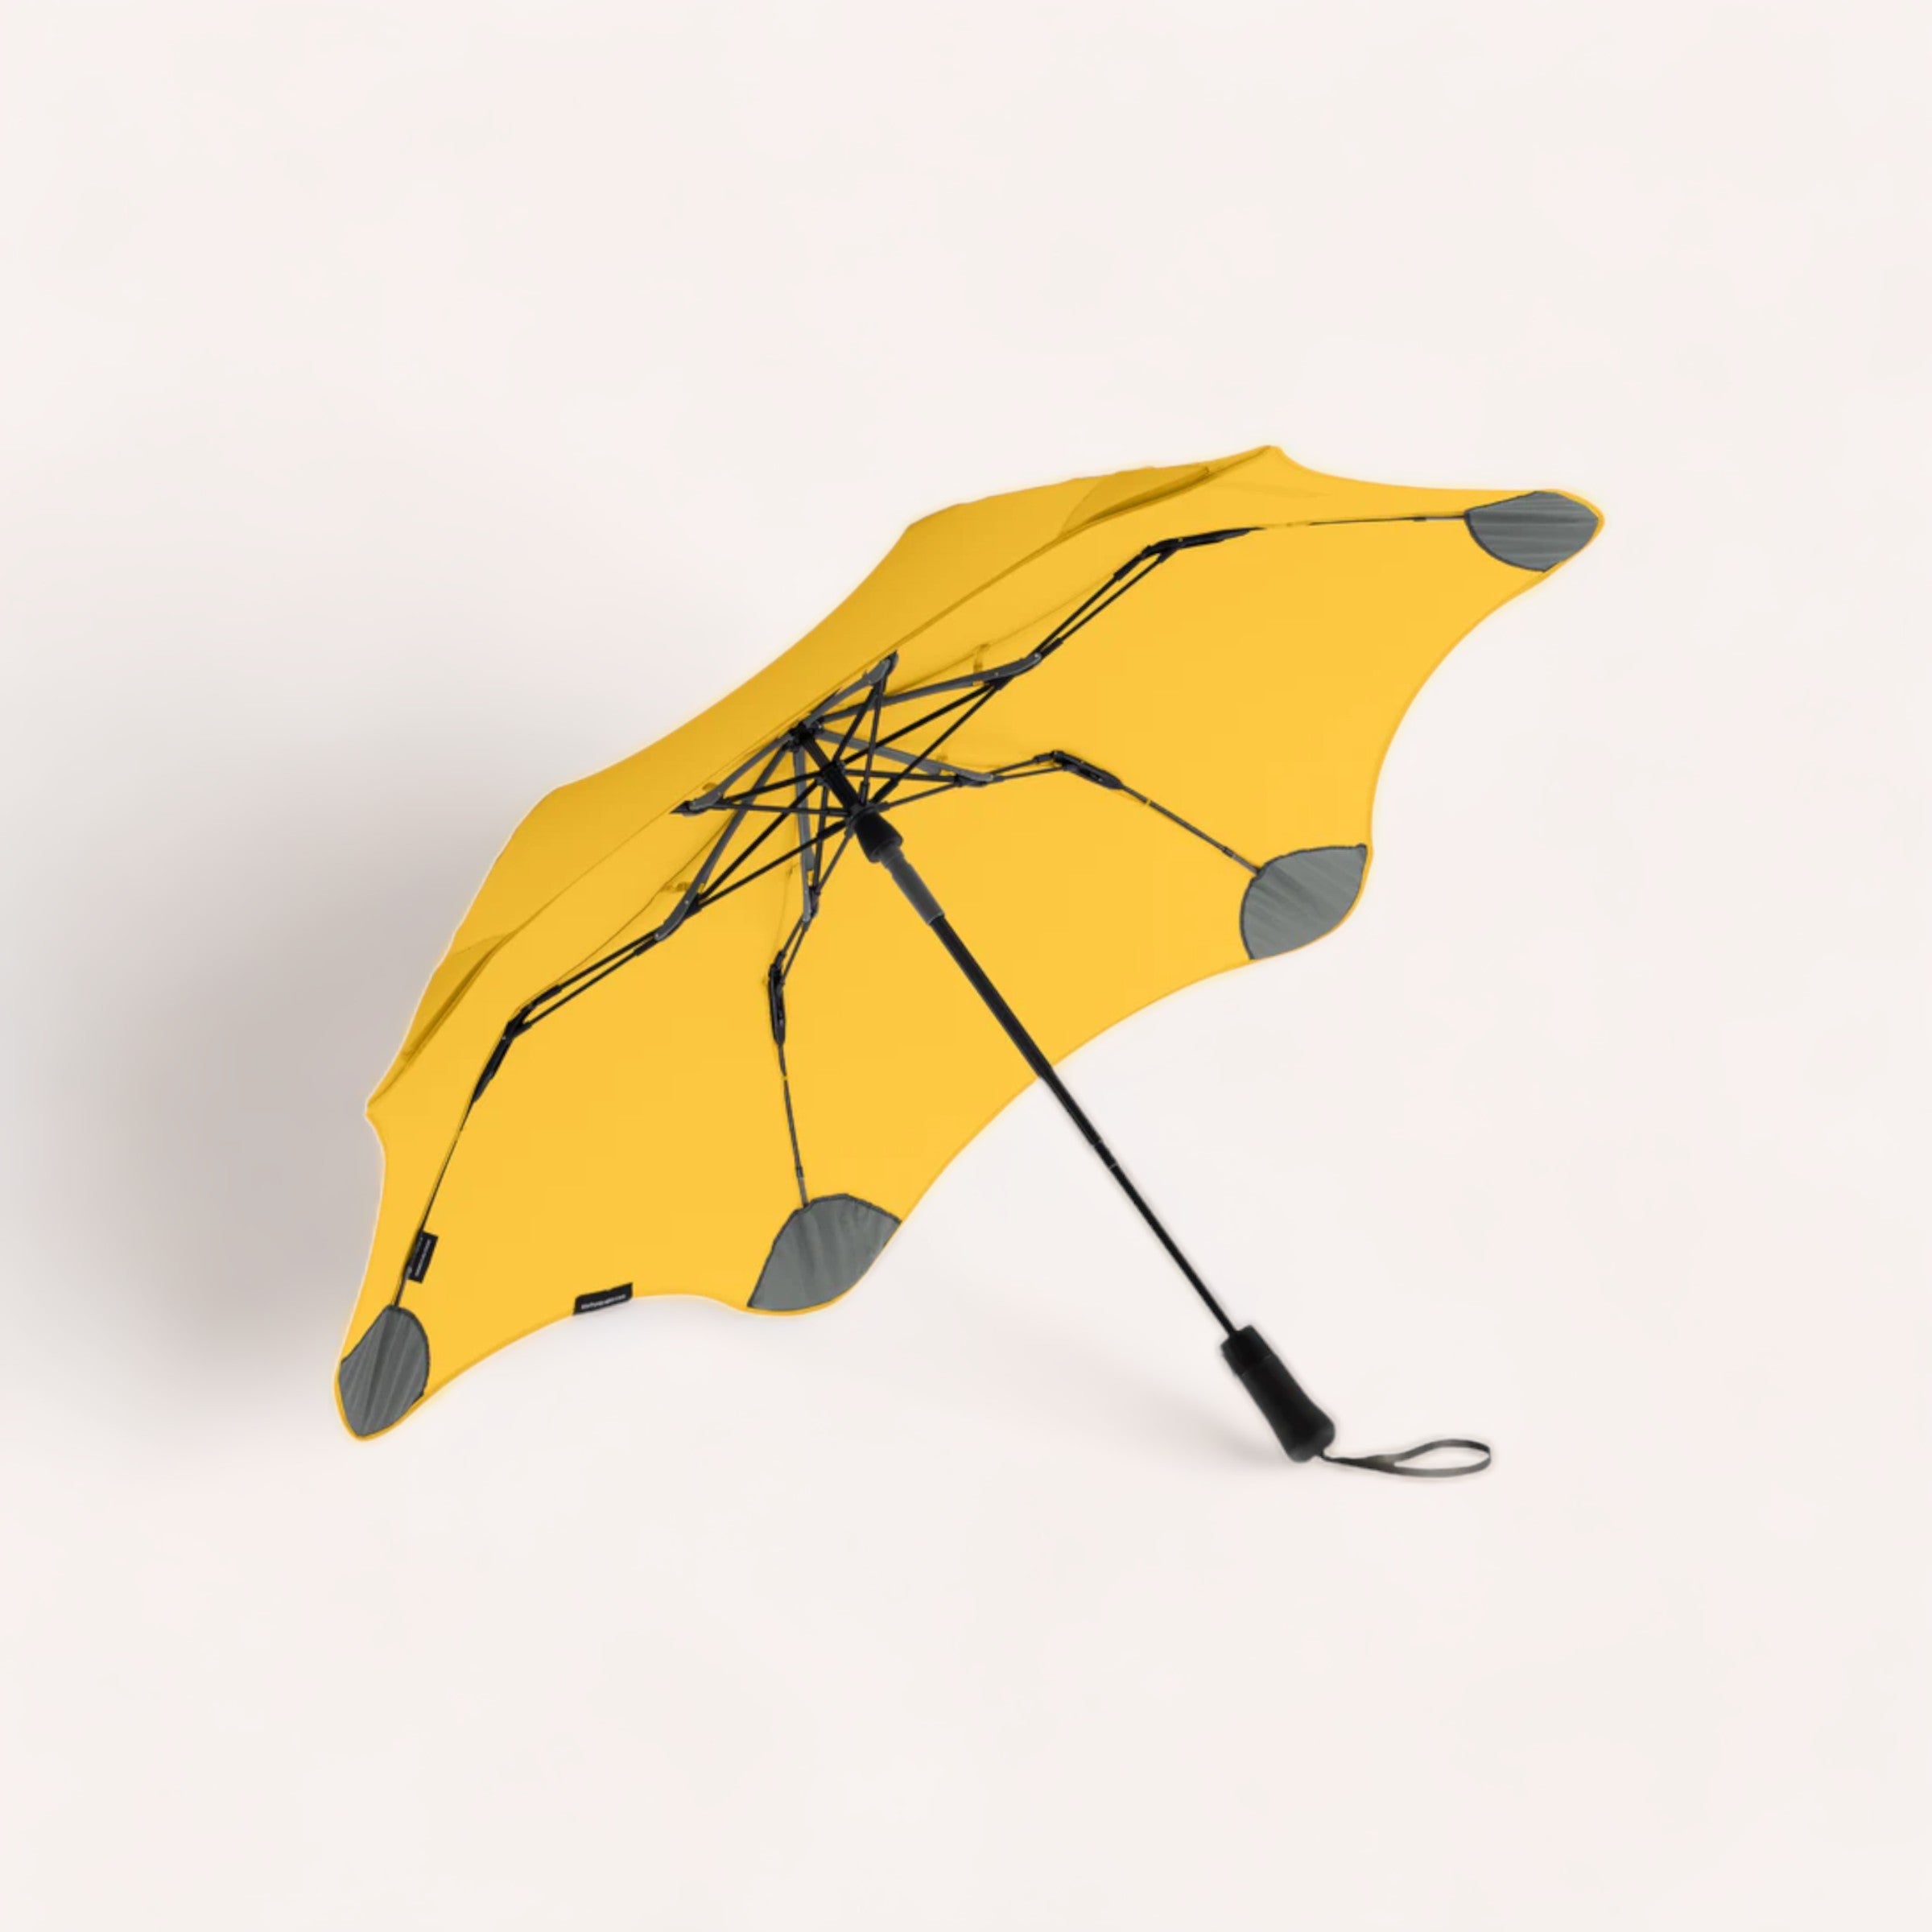 A bright yellow BLUNT Metro umbrella, designed with an auto-open canopy for the urban dweller, turned inside out, possibly by strong winds, lying against a plain white background.